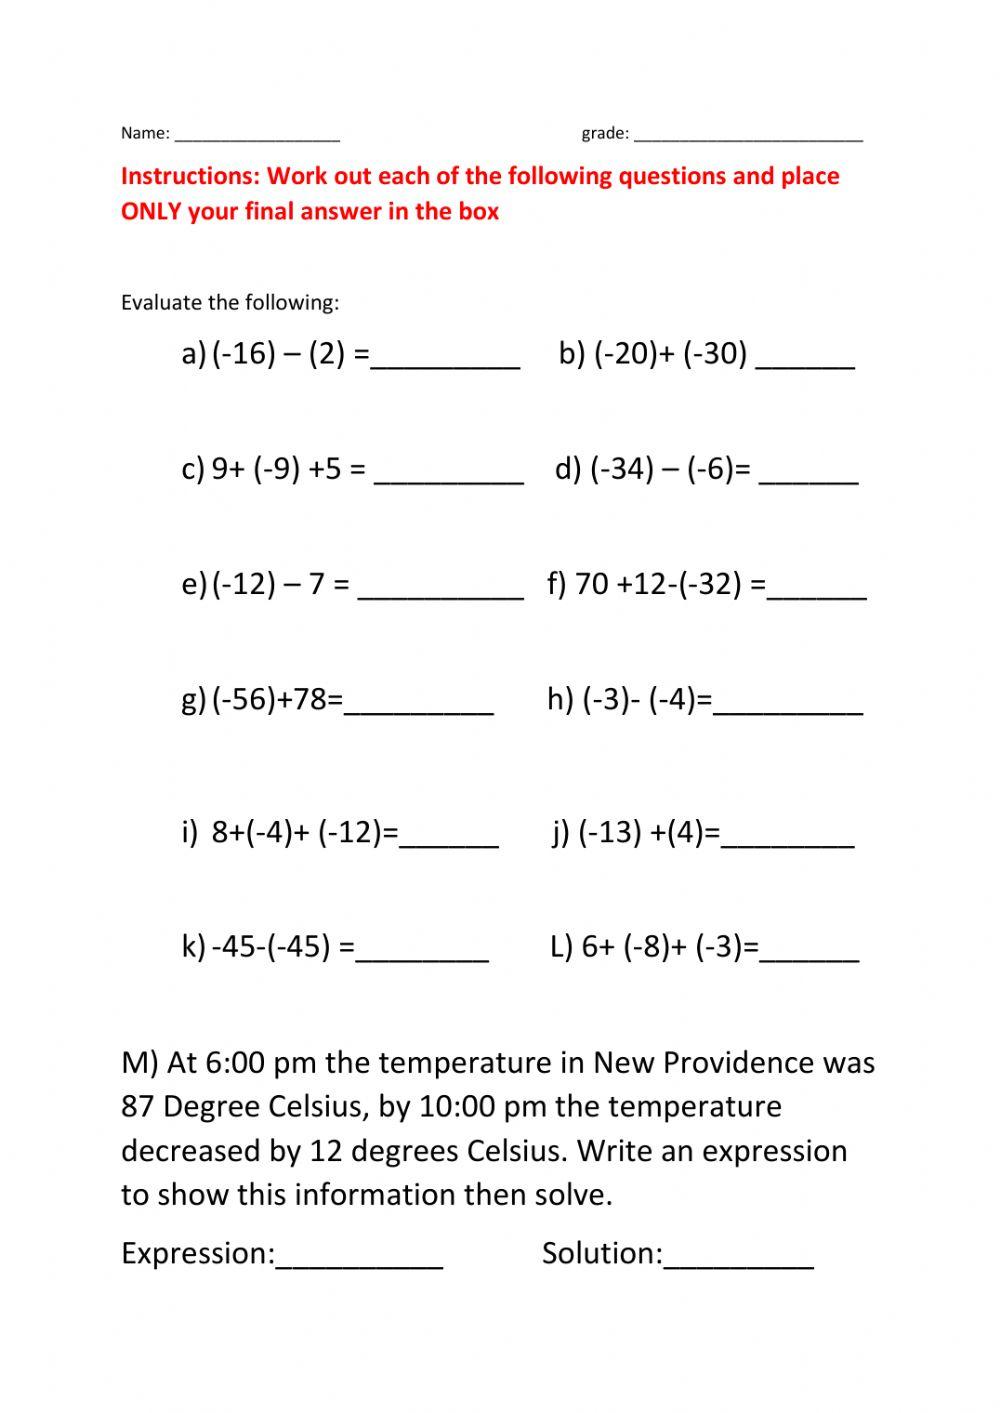 Adding and subtracting integers worksheet grade 9